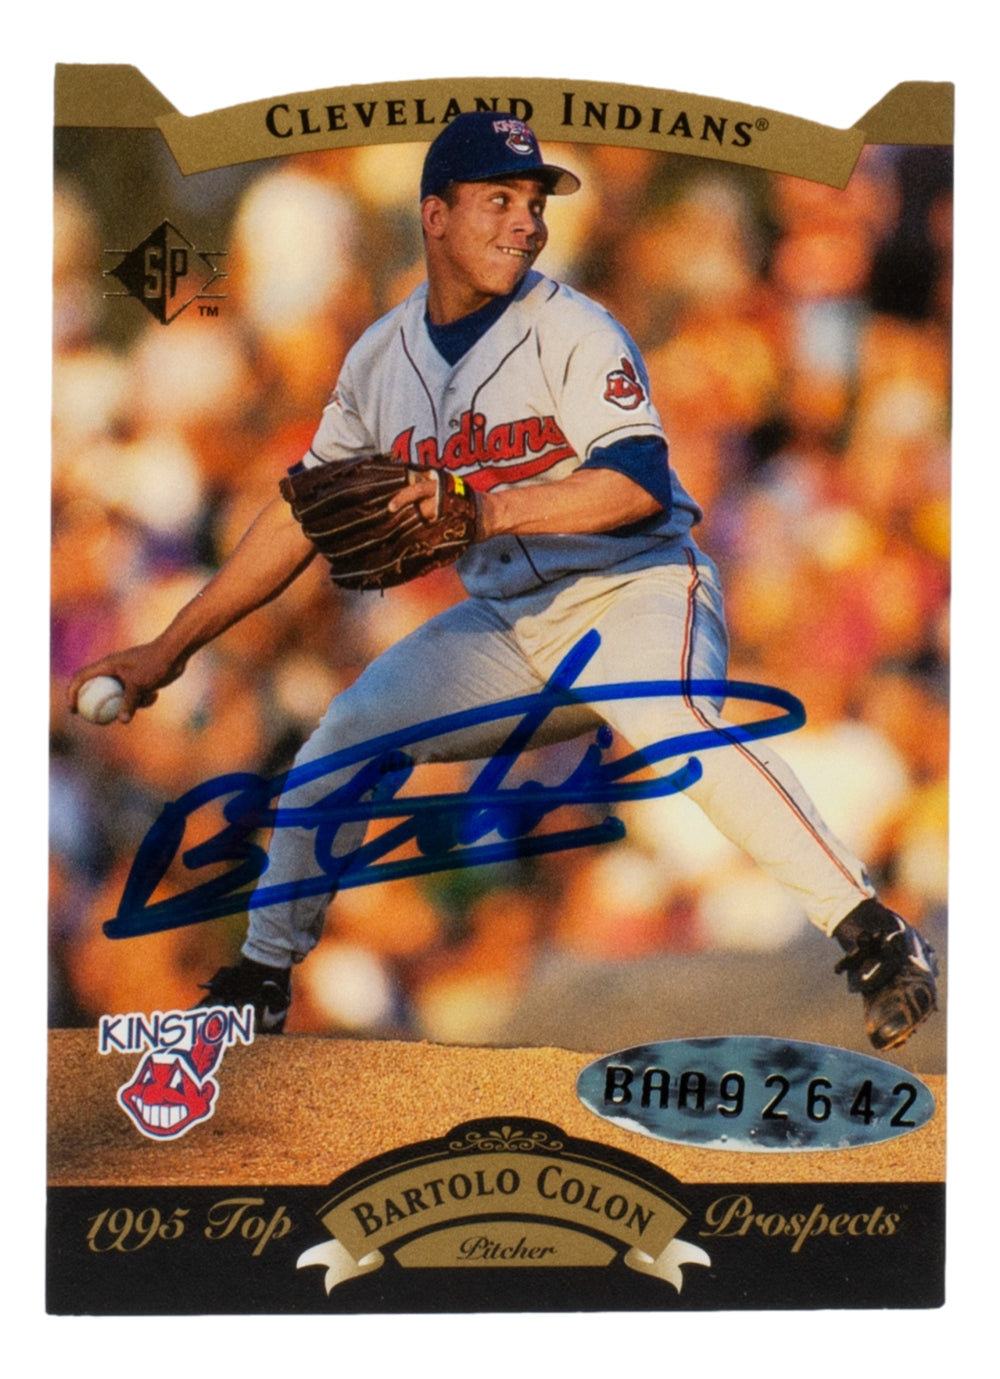 Bartolo Colon Signed Cleveland Indians 1995 Topps Prospects Card UDA